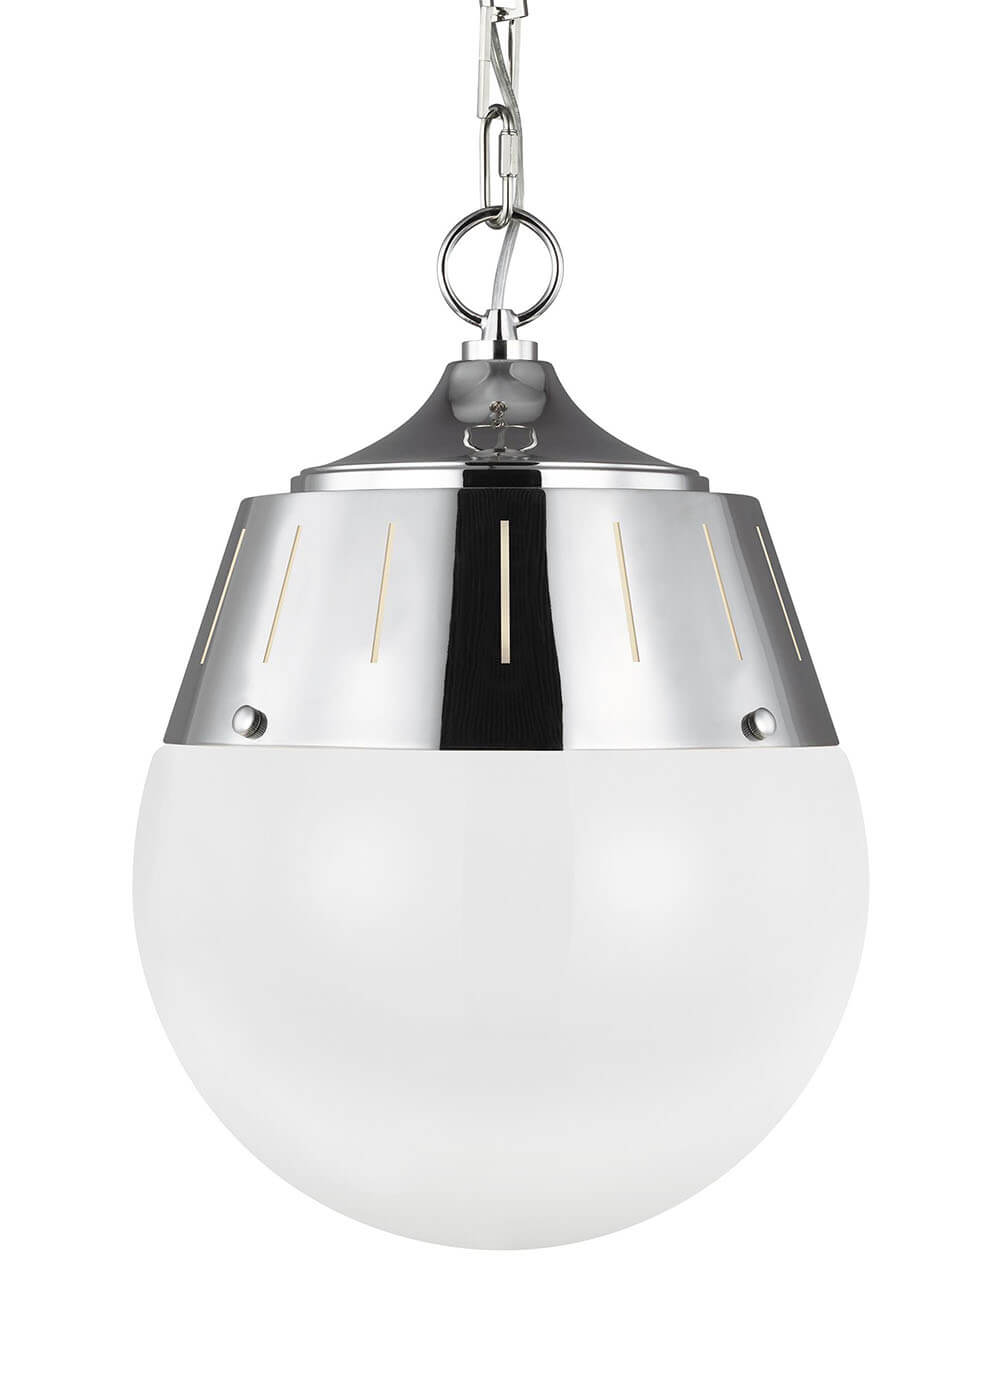 Glass globe dining room pendant light with a polished nickel finish.